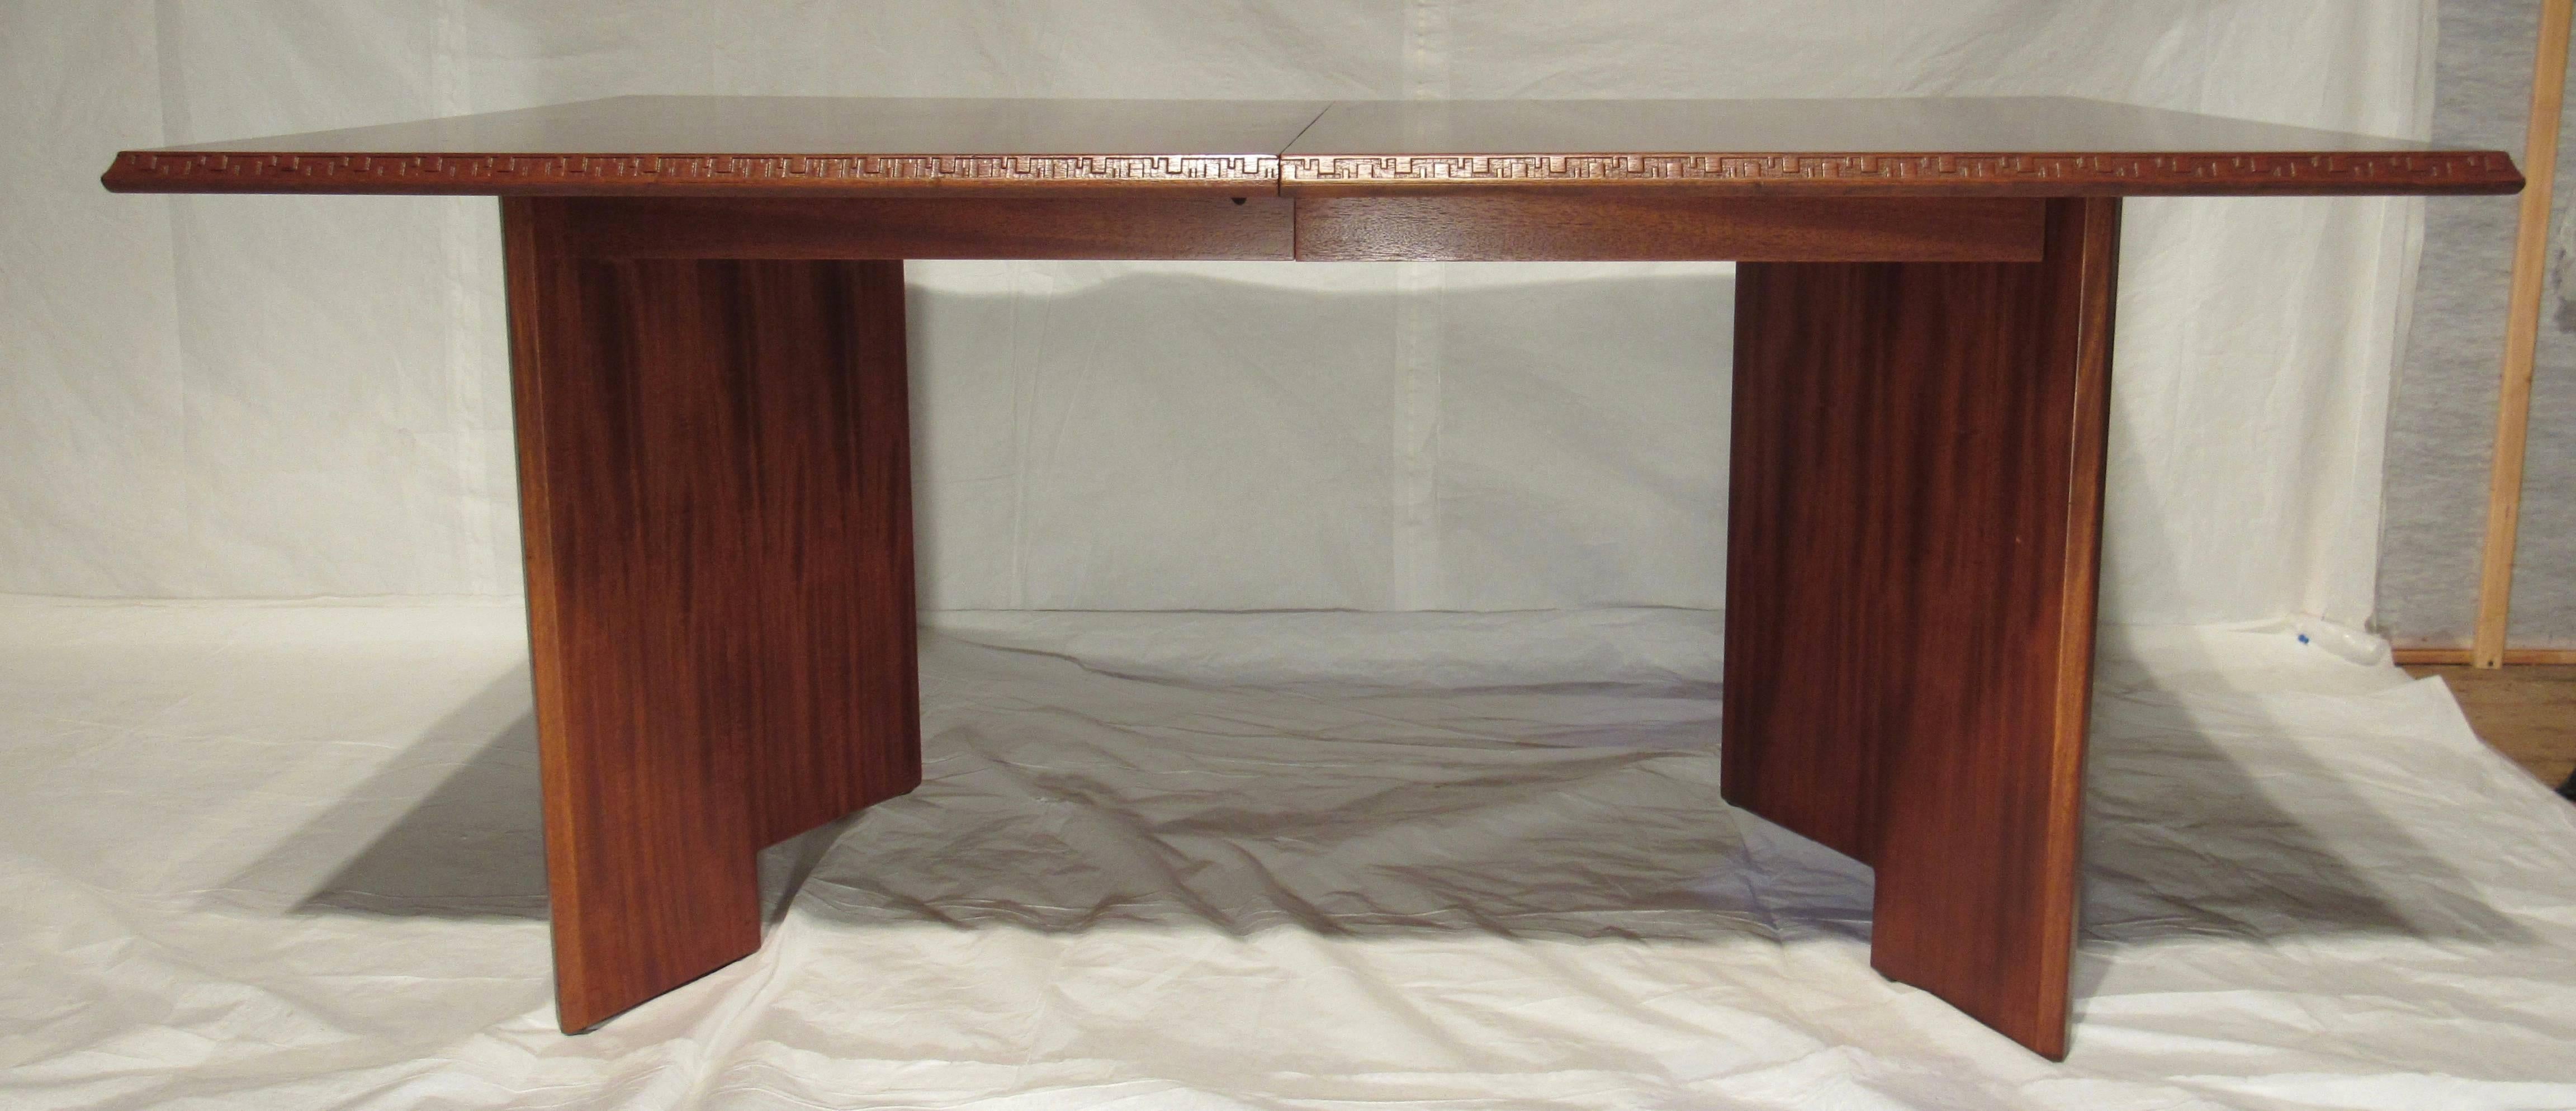 A mahogany dining table designed by Frank Lloyd Wright as part of his Taliesin line of furniture manufactured by Heritage Henredon between 1955-1956.
A very versatile table with (two) 18 inch leaves thus extending the 66 inch table to 102 inches